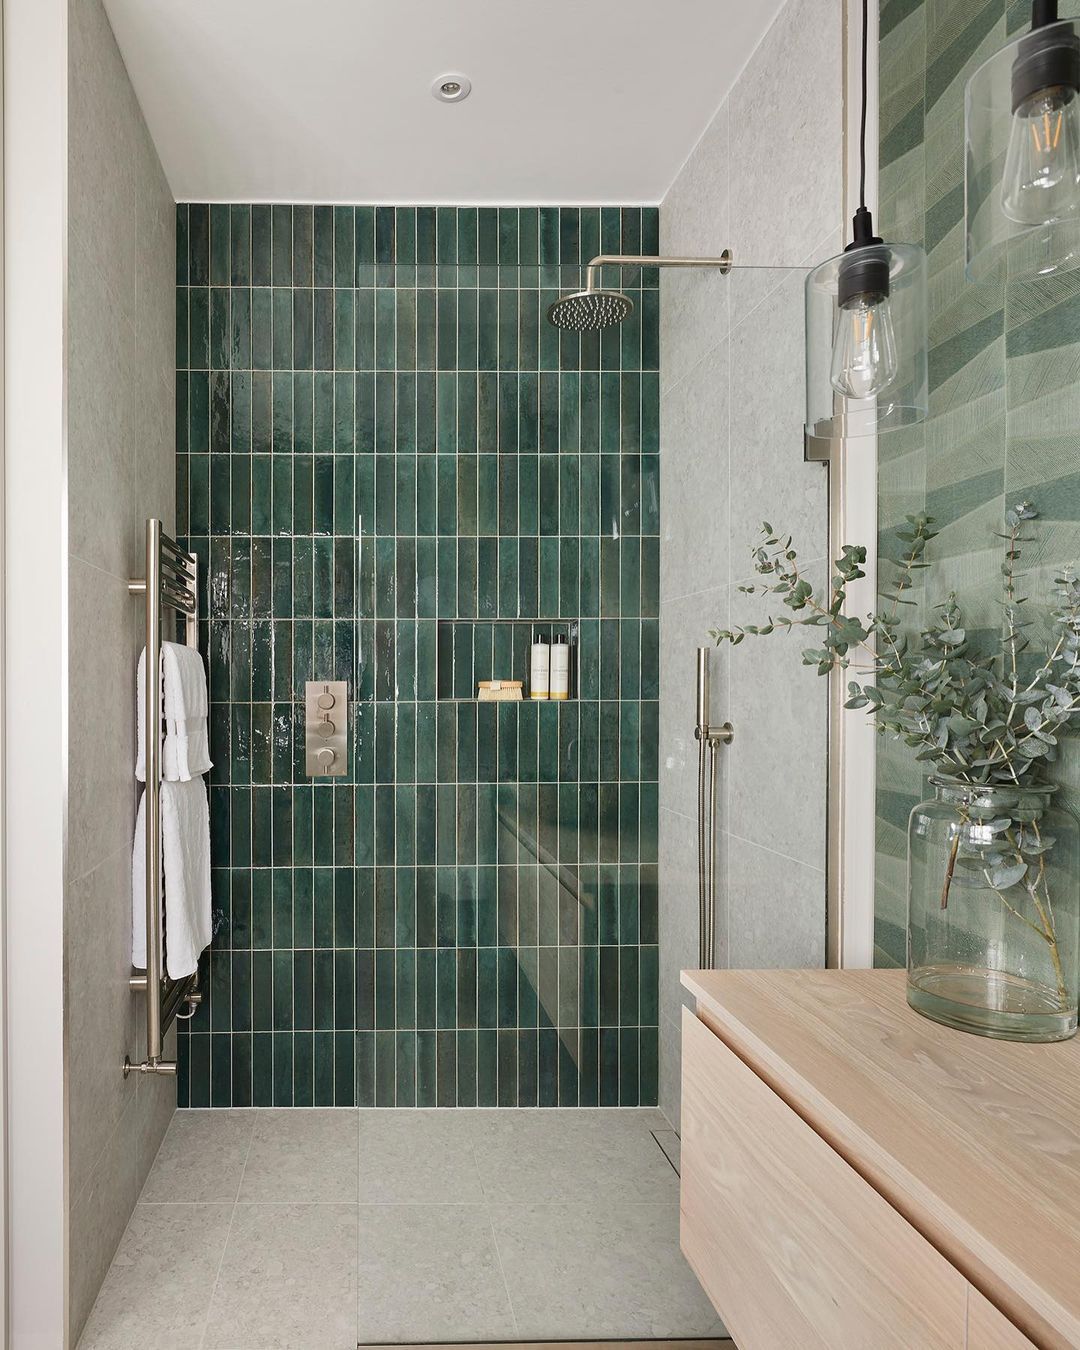 Color Inspiration: Choosing the Right Bathroom Colors for You